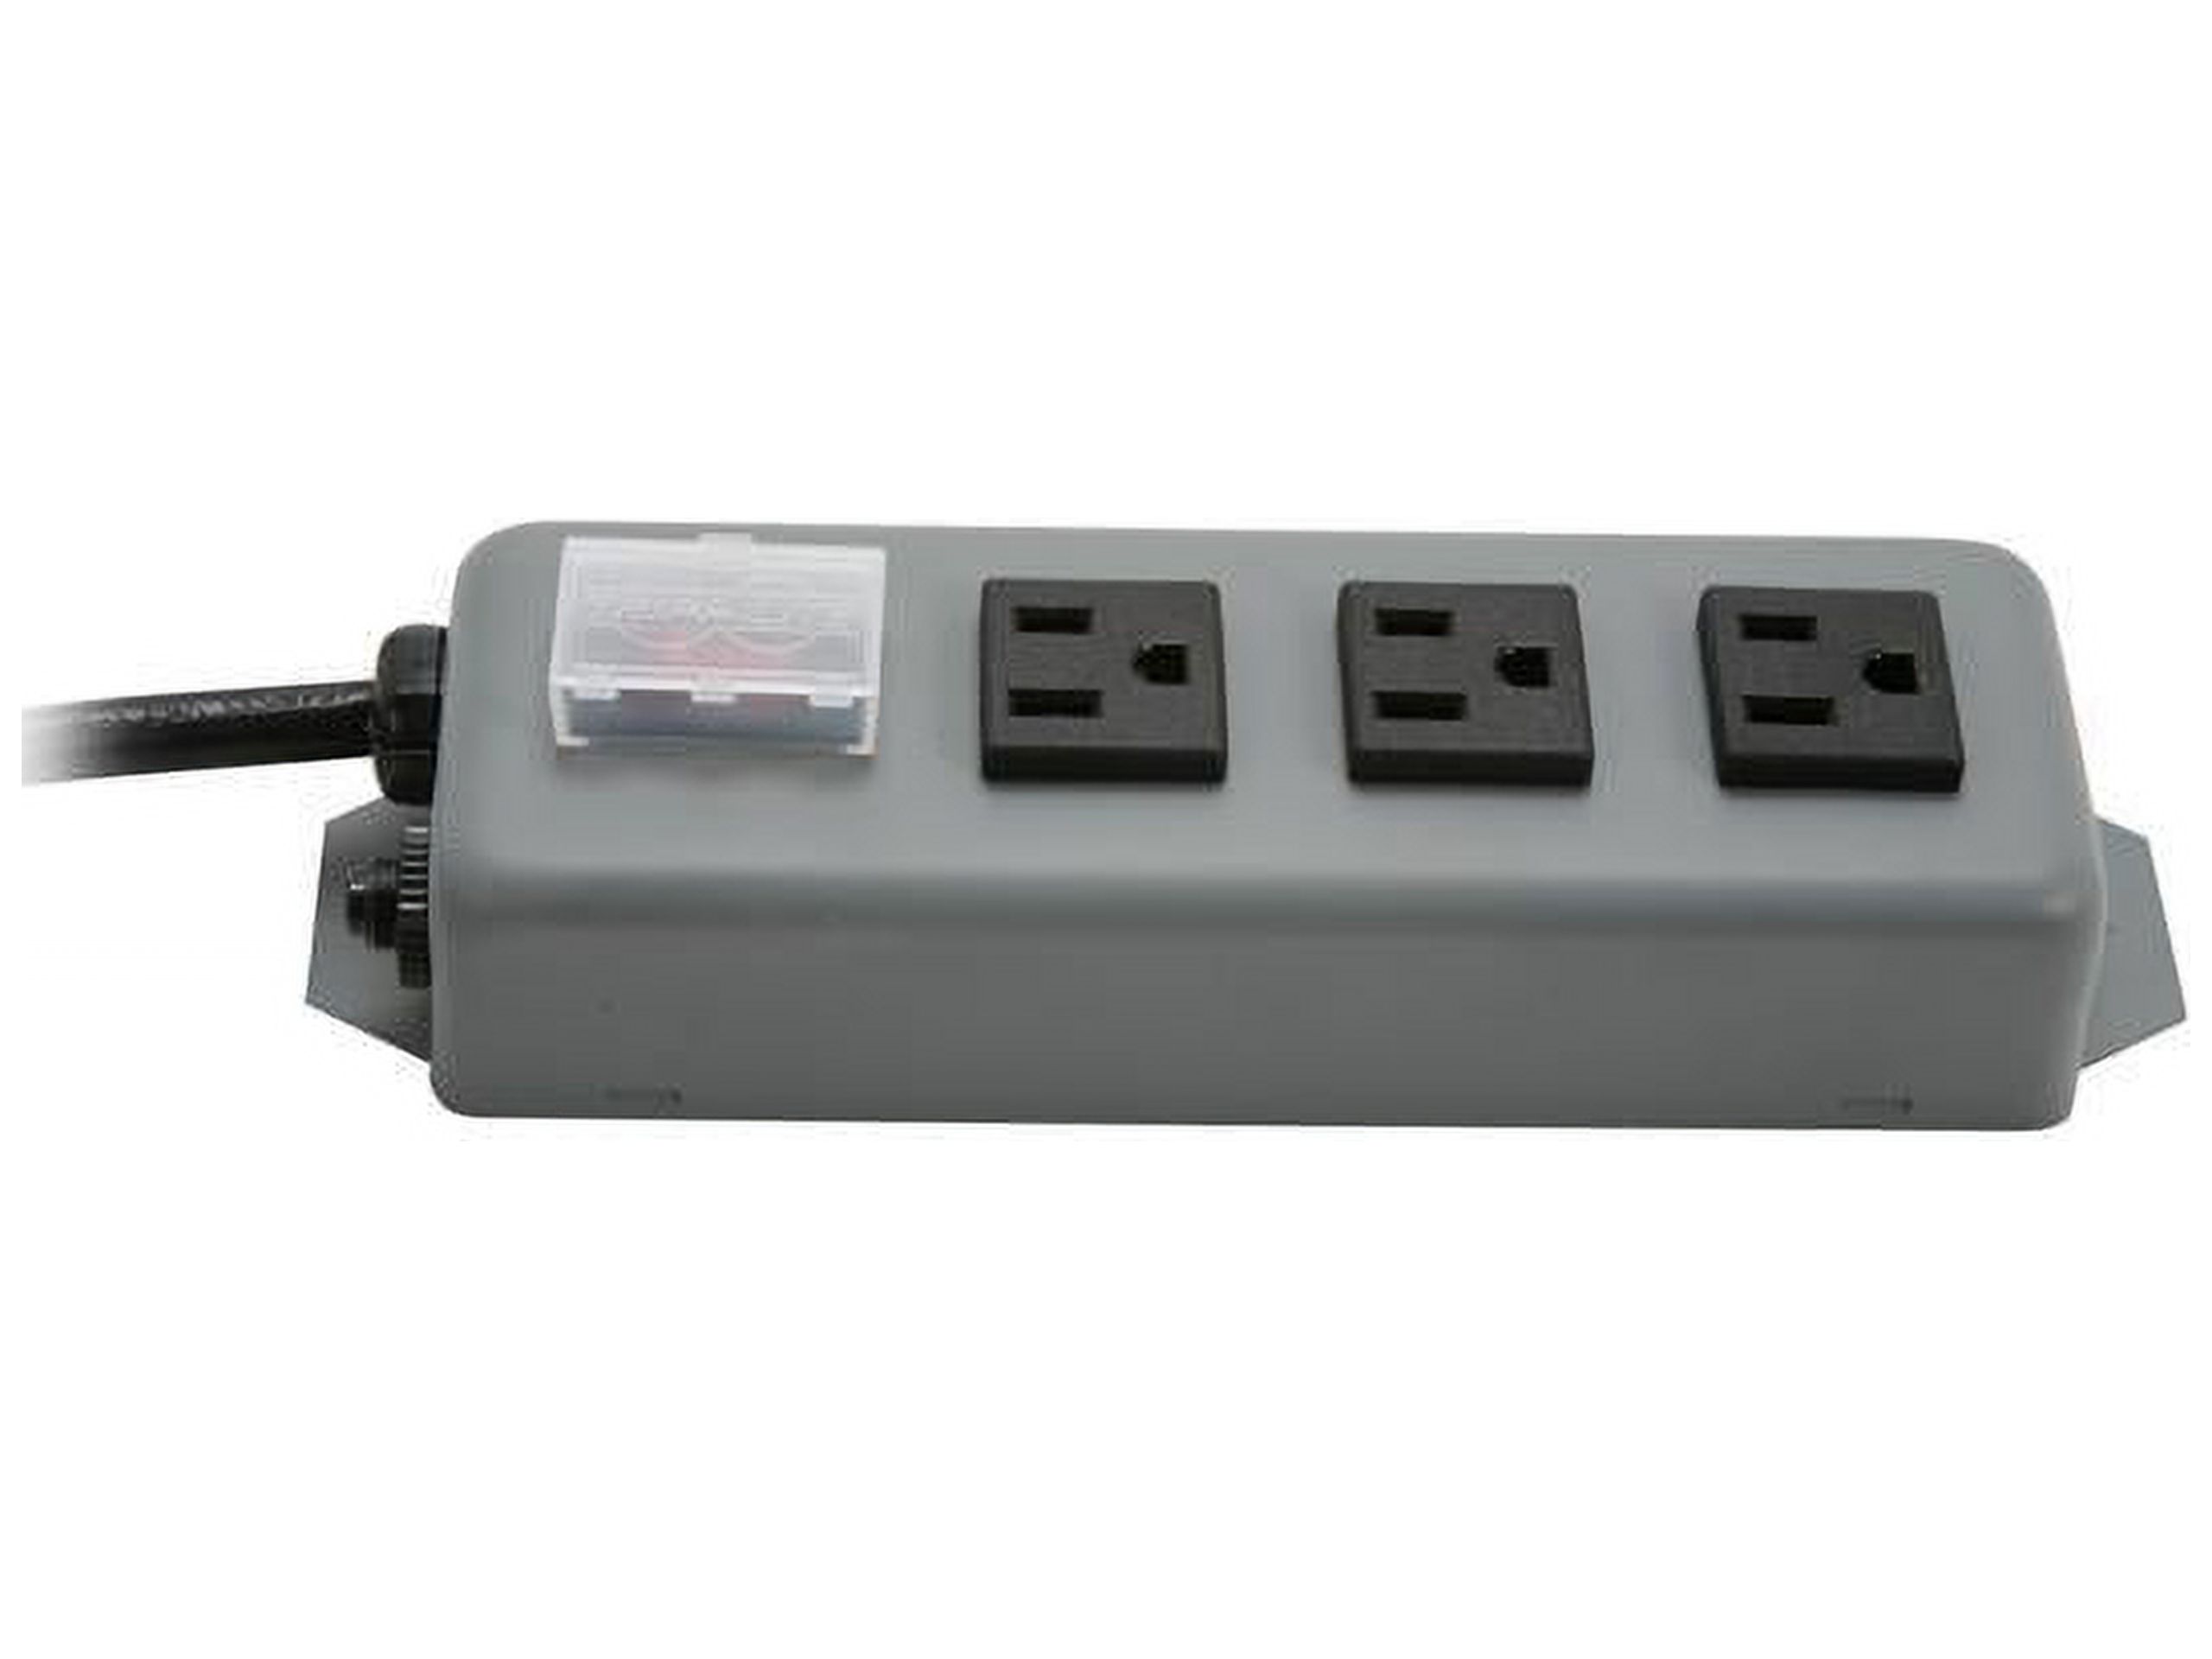 Tripp Lite 3SP Waber by Tripp Lite 3-Outlet Industrial Power Strip, 6-Foot Cord - image 3 of 4